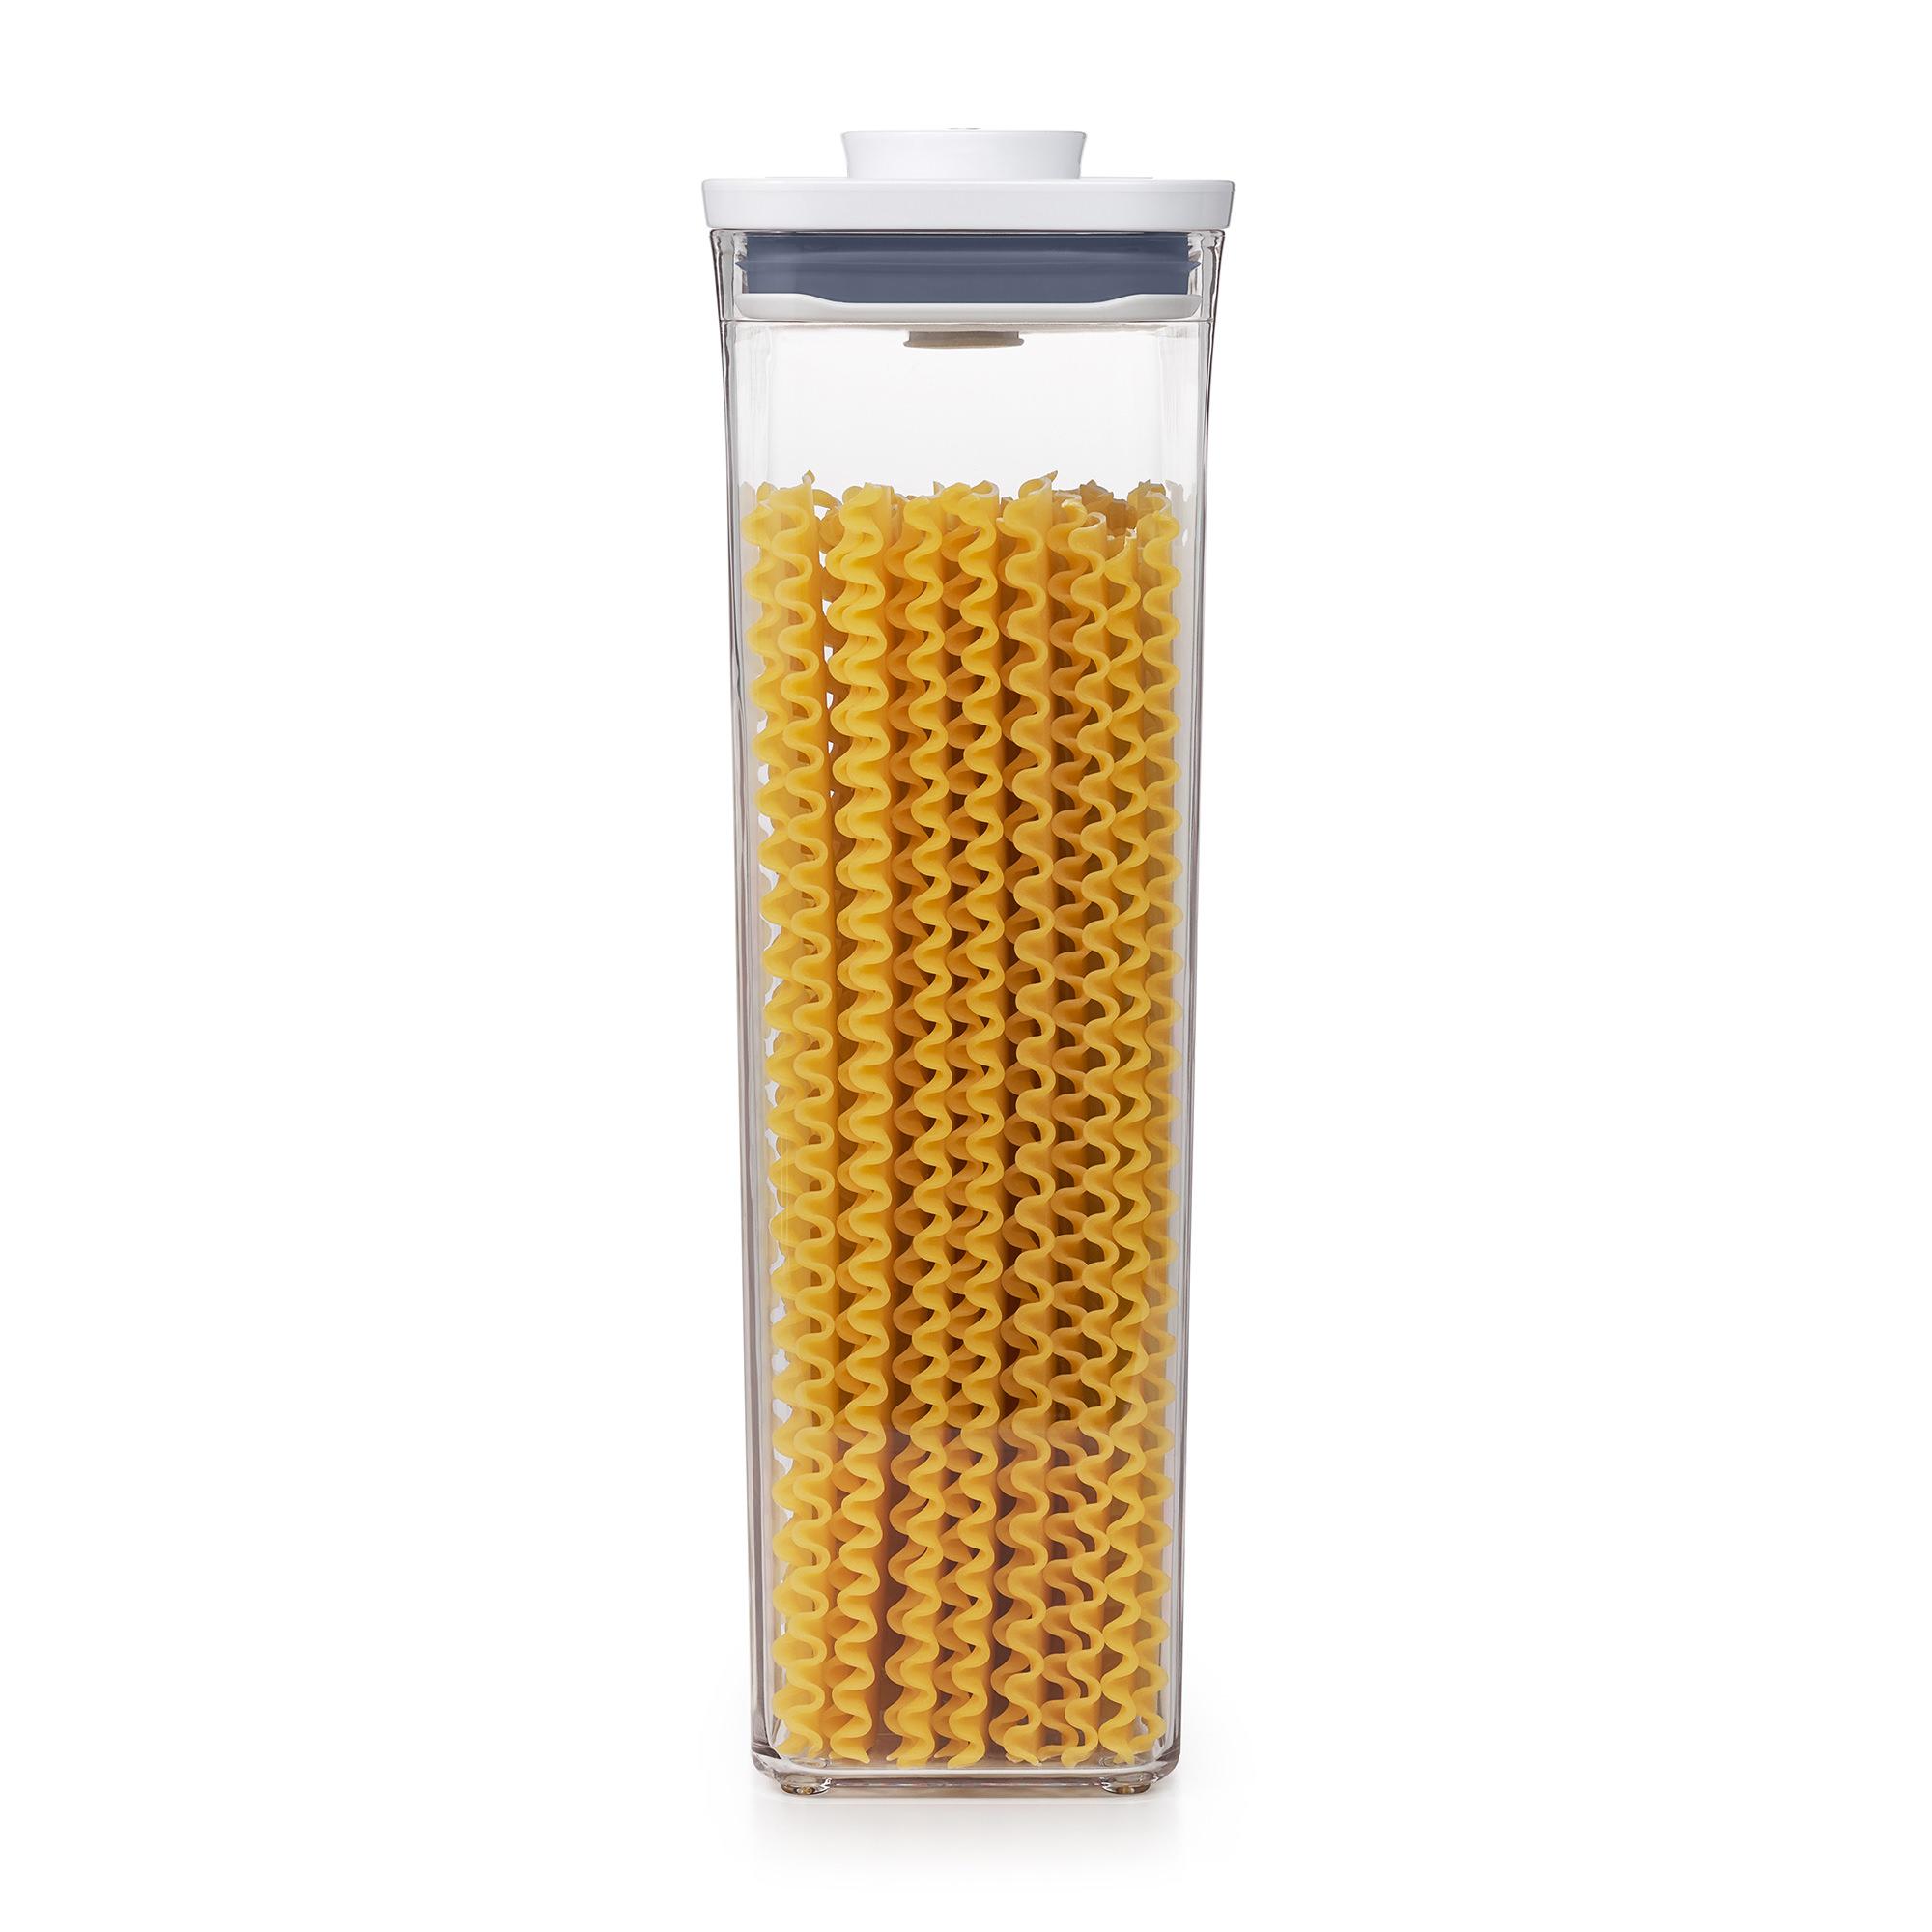 OXO Good Grips Rectangular Pop 2.0 Container 3.5L Image 3